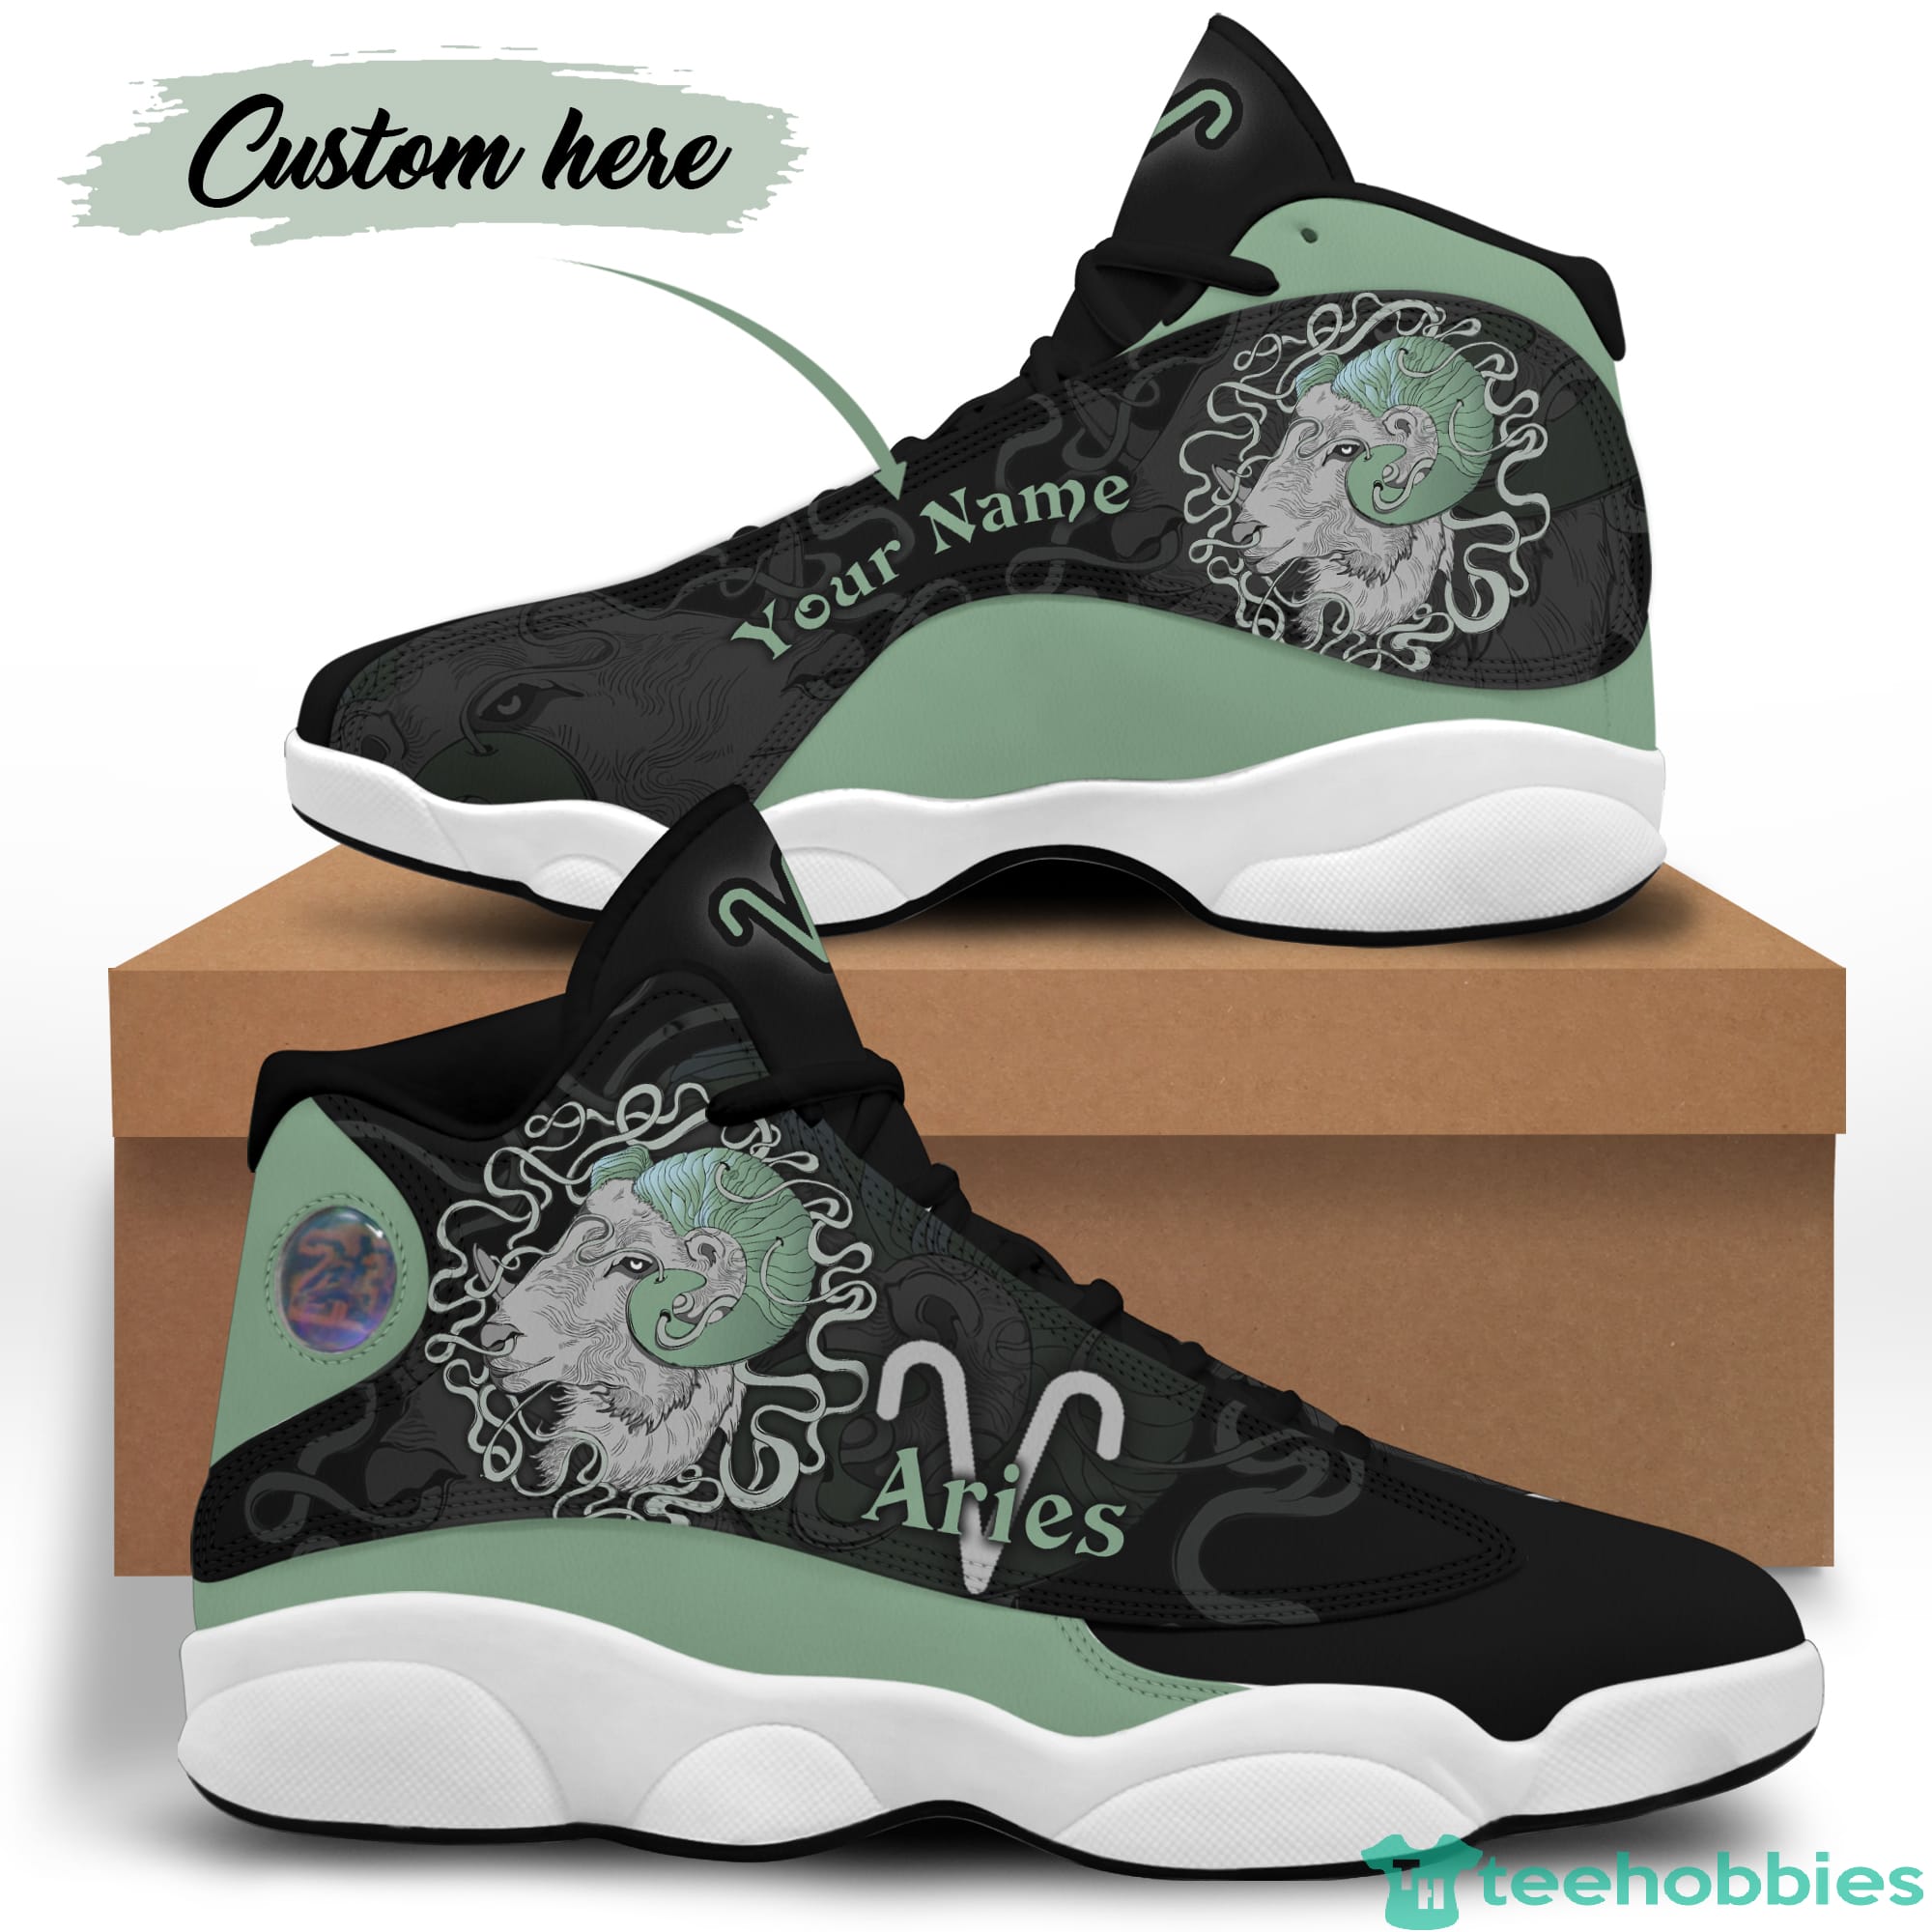 Aries Birthday Gift Personalized Name Personalized Name Air Jordan 13 Shoes SKU-206